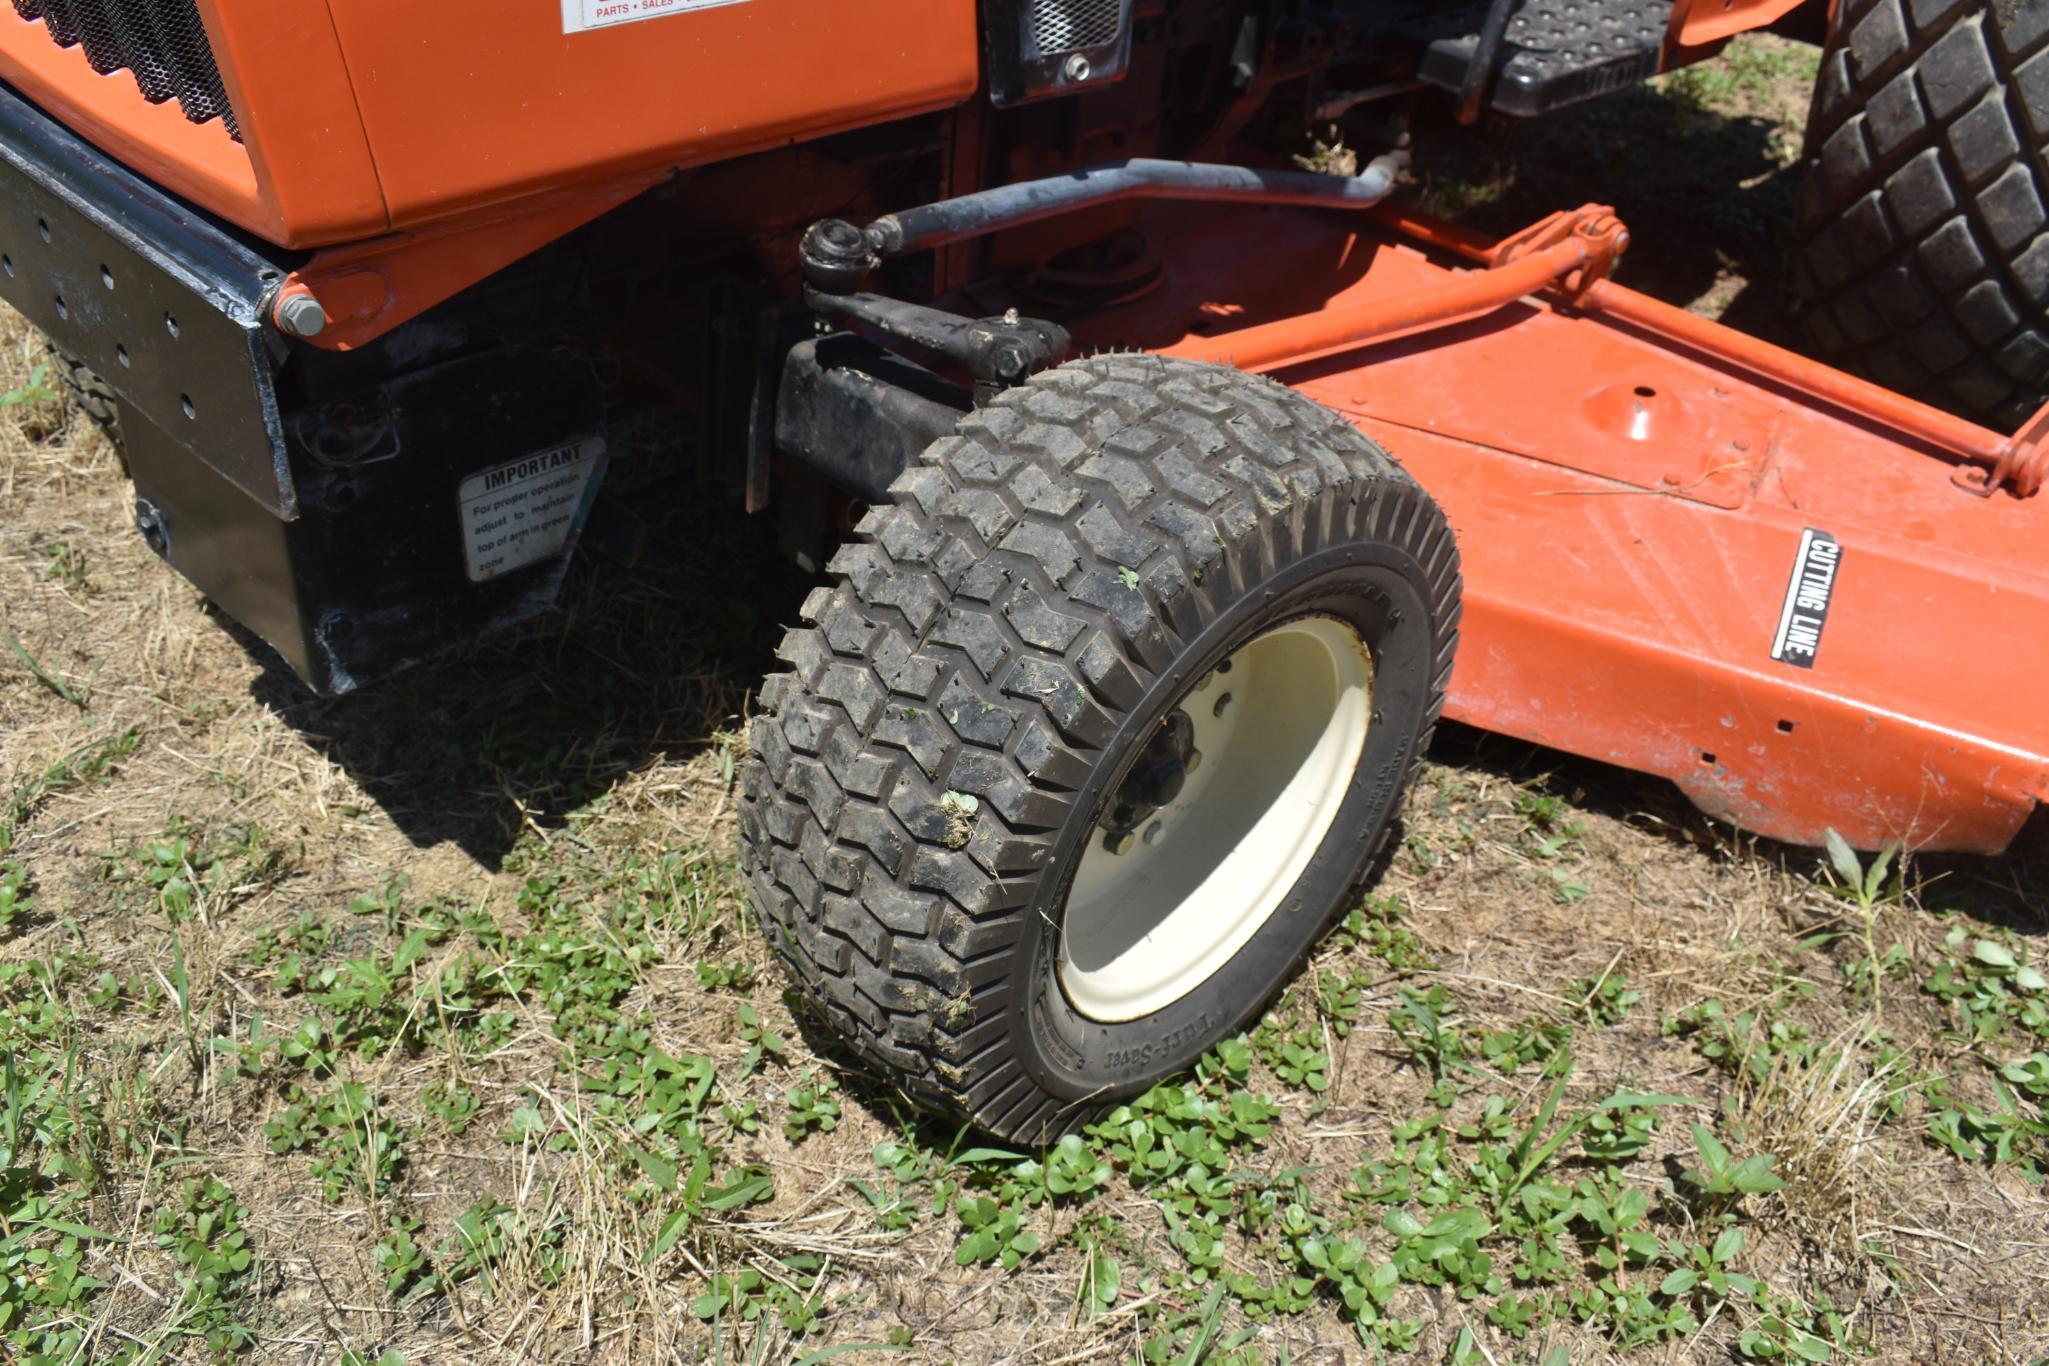 1980 Allis-Chalmers 5020 2wd tractor